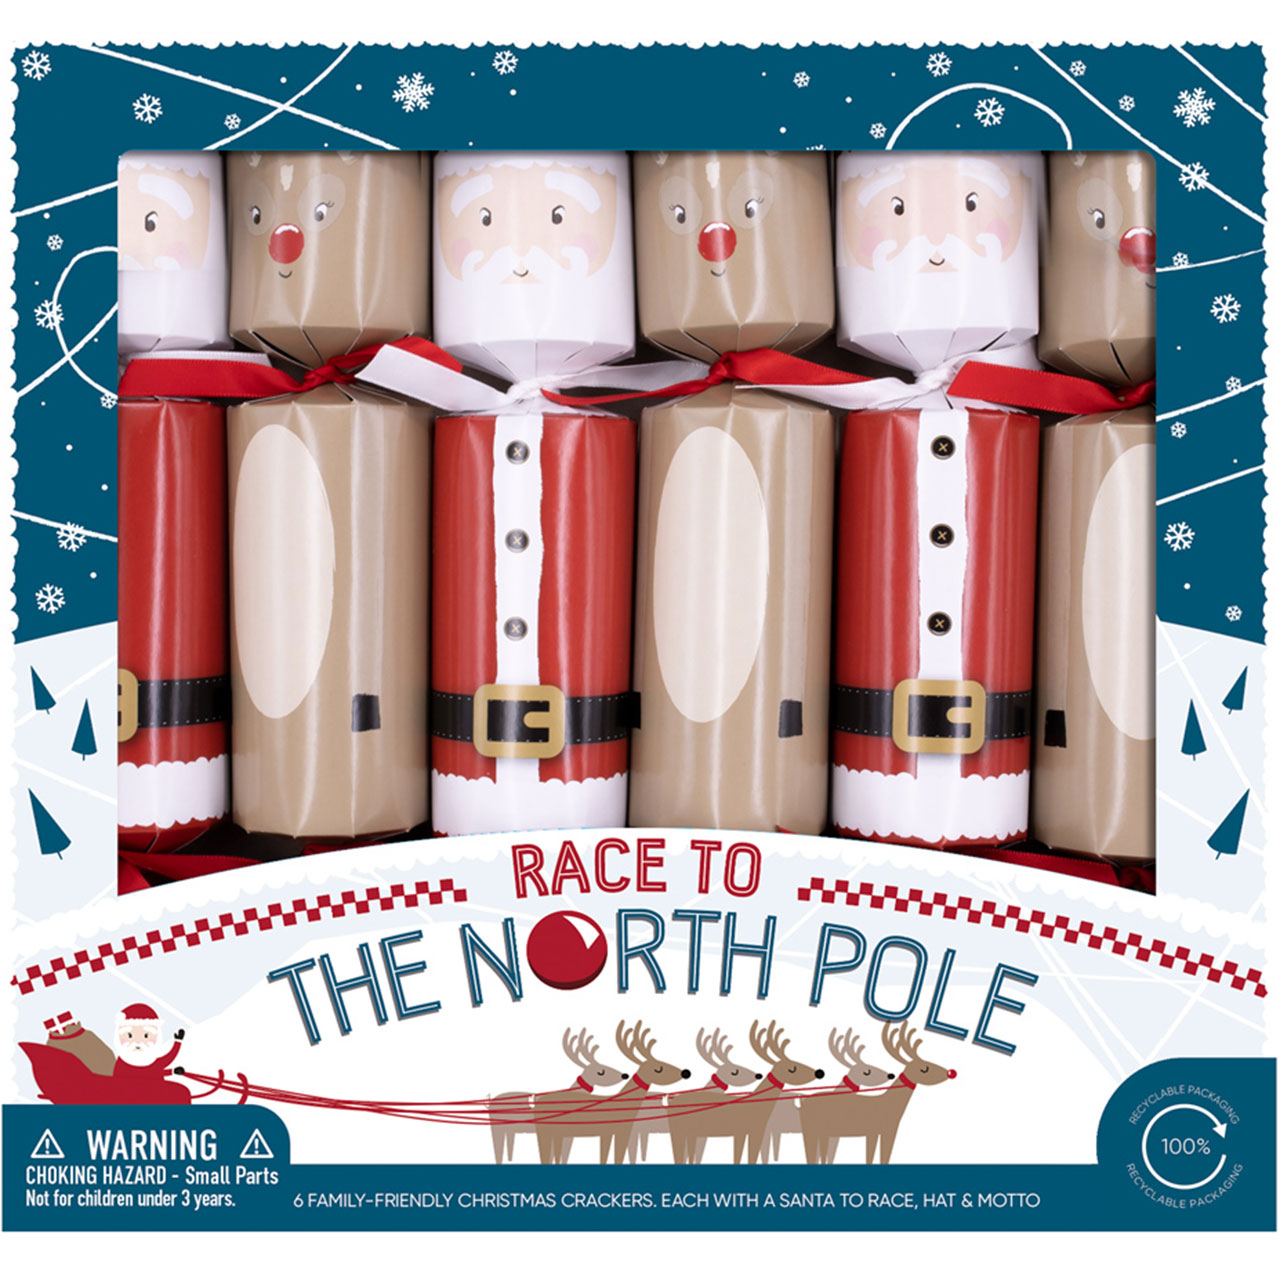 Cracker - Race to the North Pole 